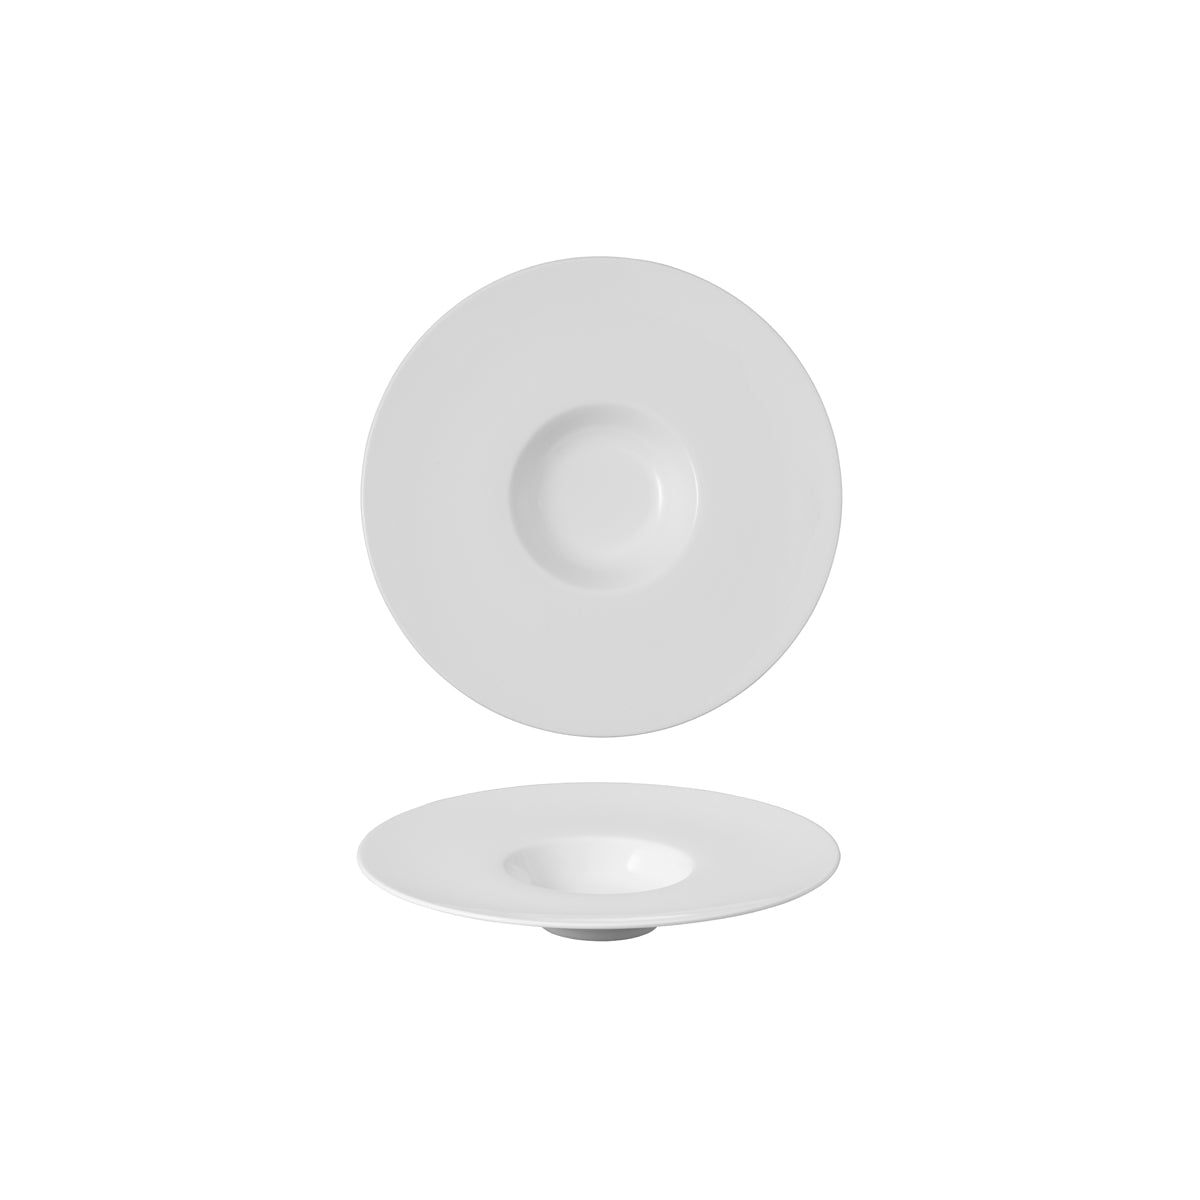 VB16-4090-2706 Villeroy And Boch Villeroy And Boch Stella Cosmo White Deep Plate 250x250x45mm / 120ml Tomkin Australia Hospitality Supplies